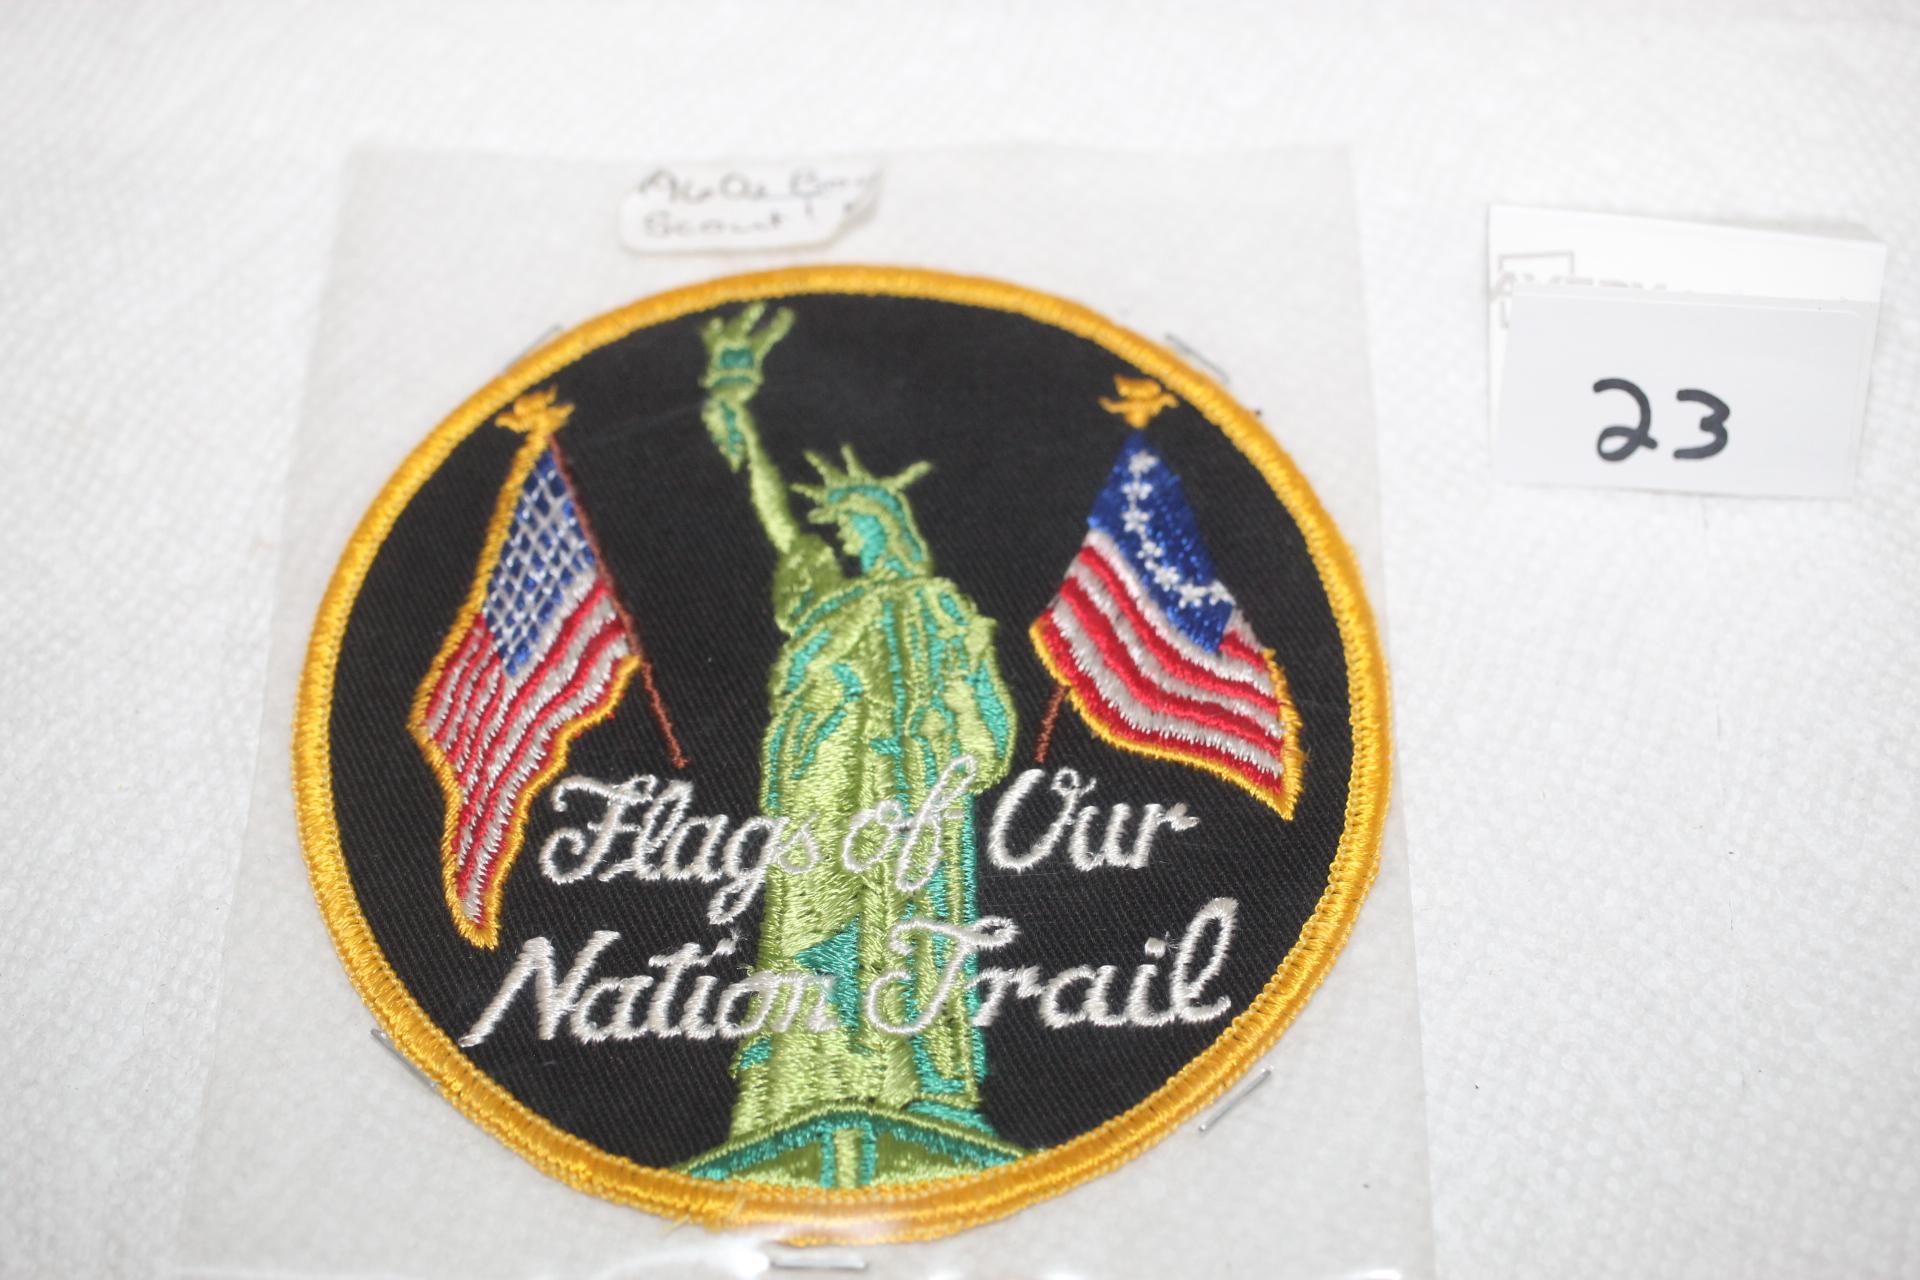 Flag of Our Nation Trail Boy Scout Patch, 4 1/4" round